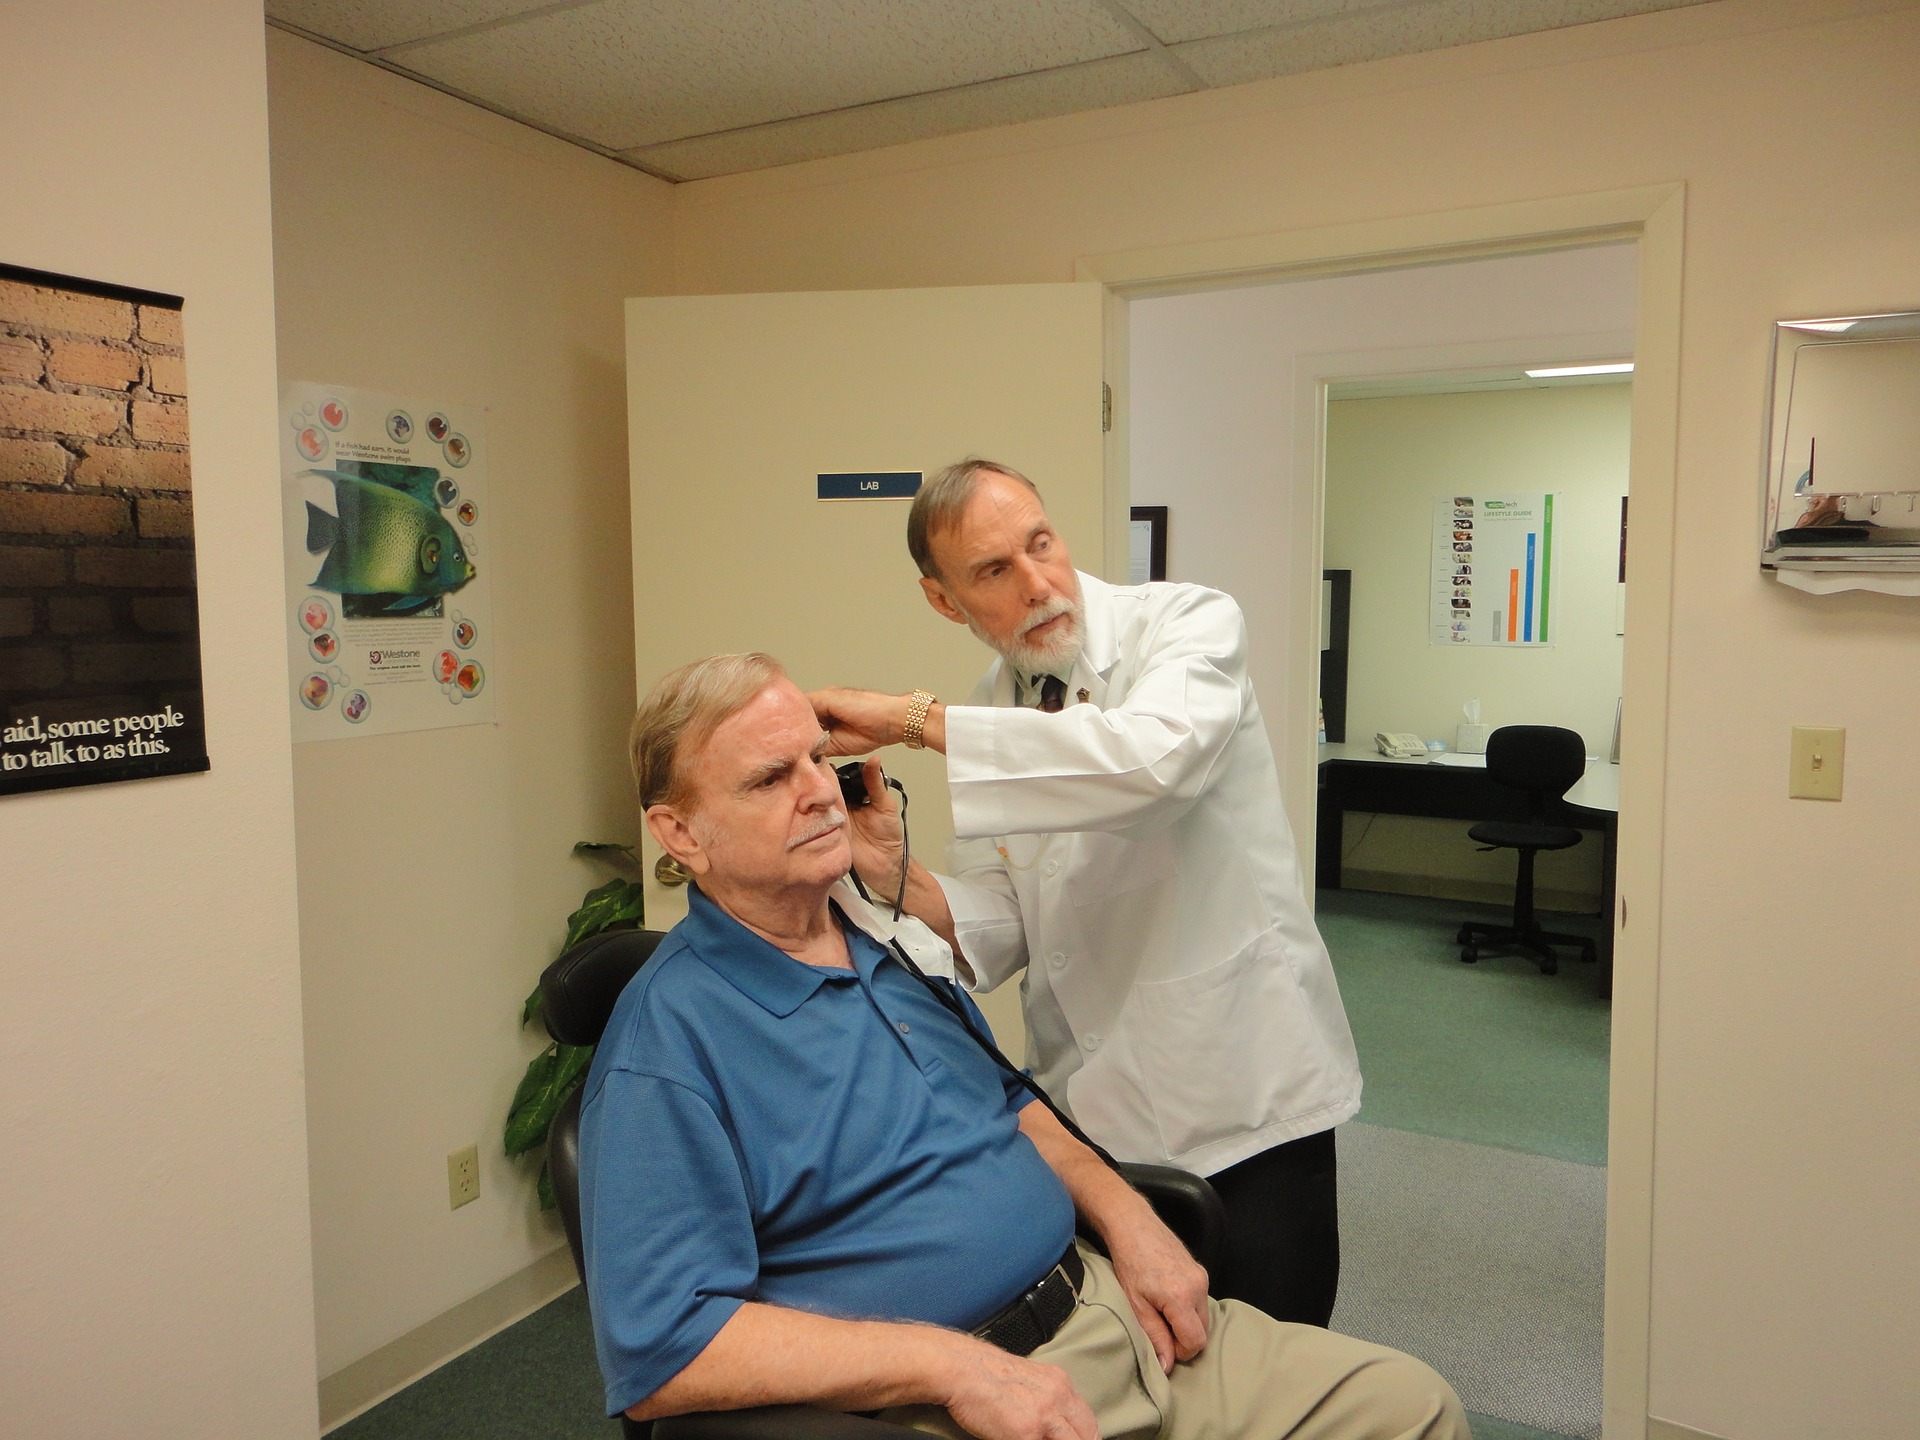 What to expect at the audiologist? Man going throug a hearing check with doctor examining him